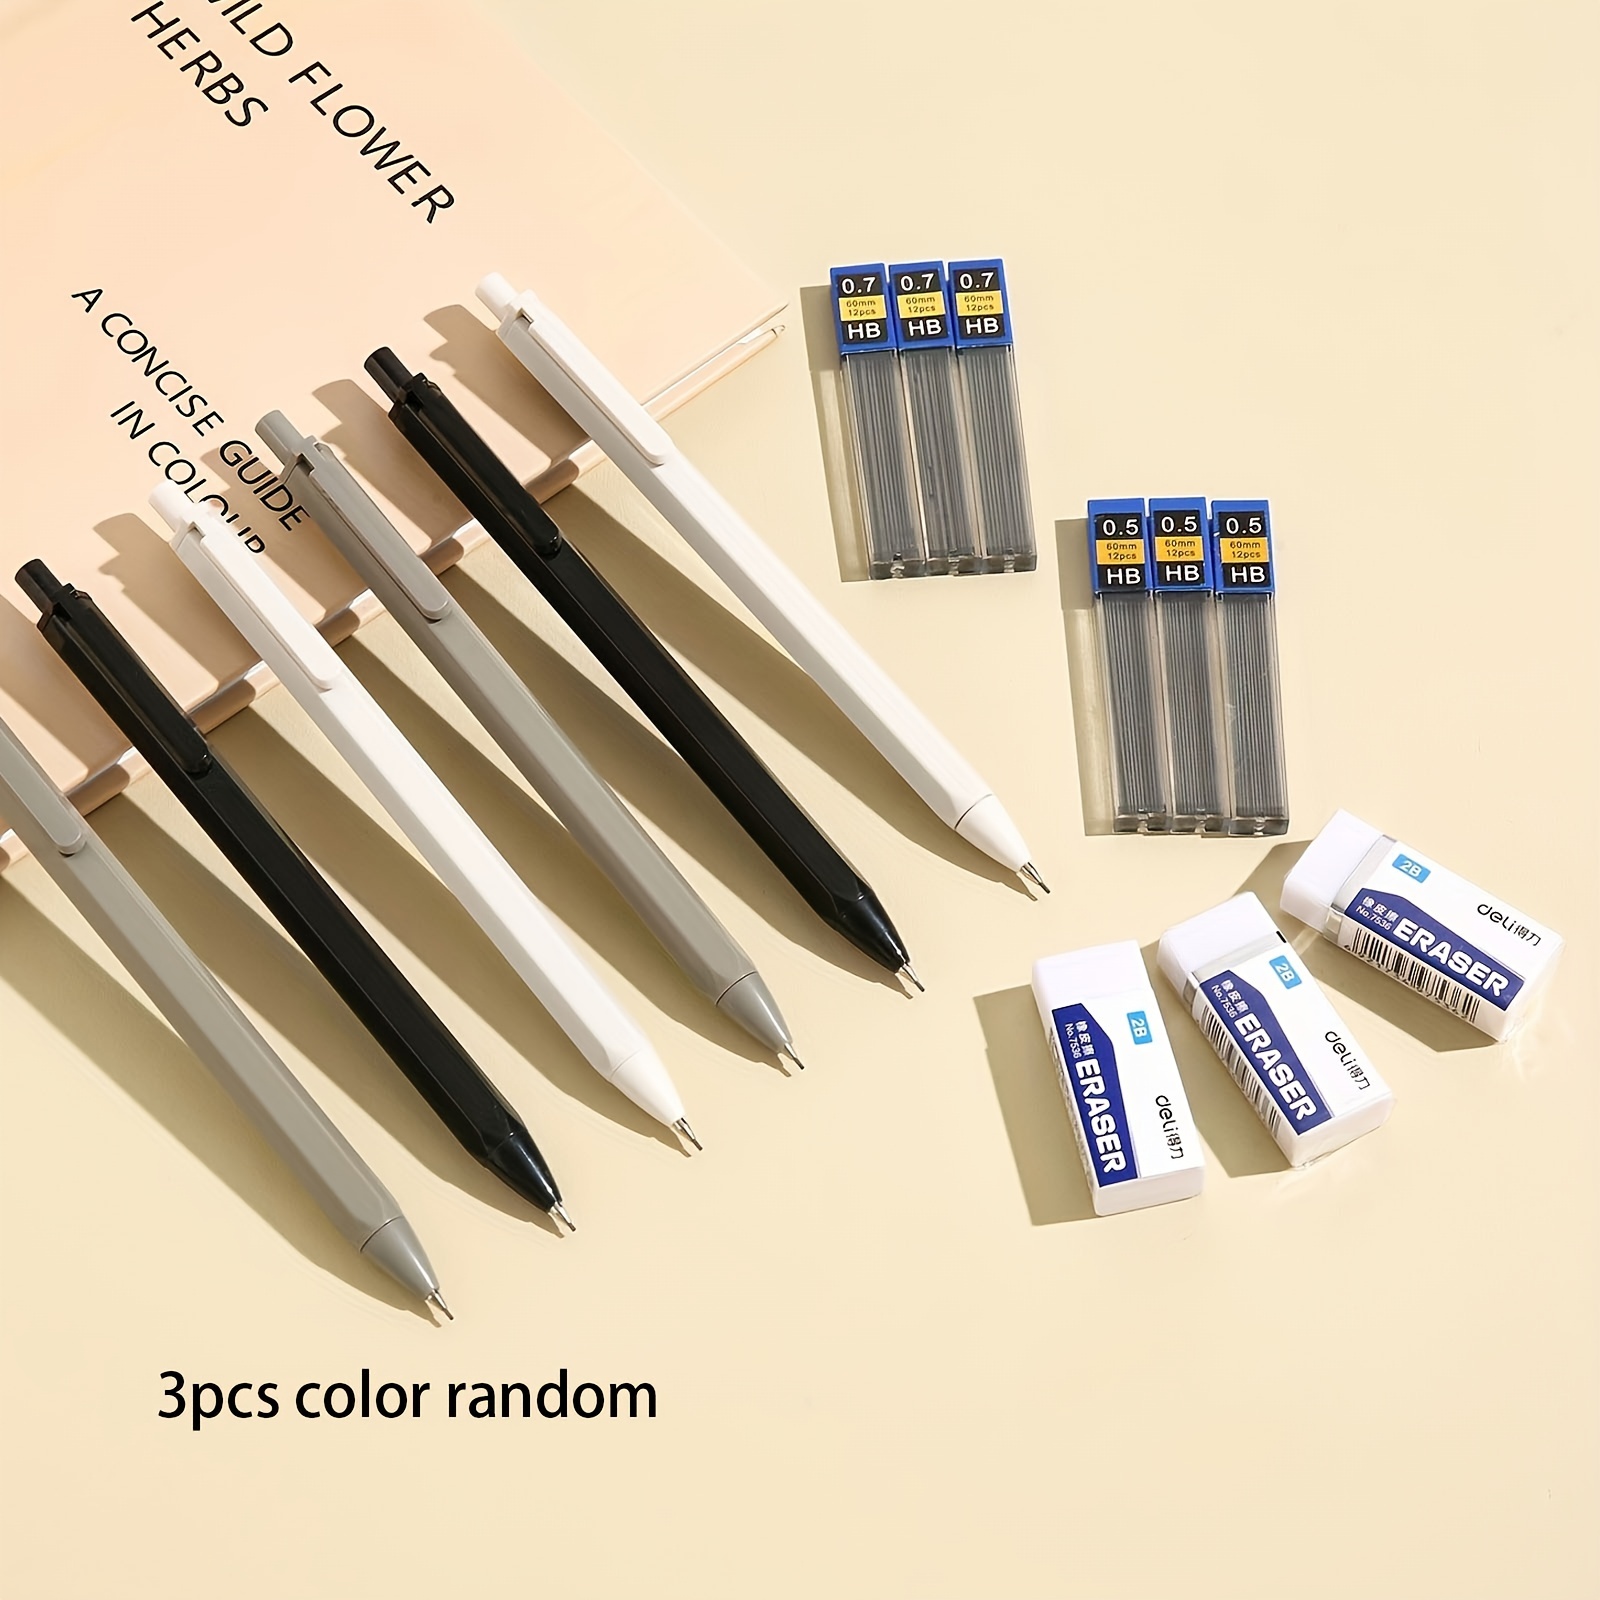 11pcs High Quality Mechanical Pencil Set, 3pcs White 0.5mm Mechanical  Pencils, 72pcs 0.5mm Refills, 2pcs Erasers, Suitable For Writing And Drawing